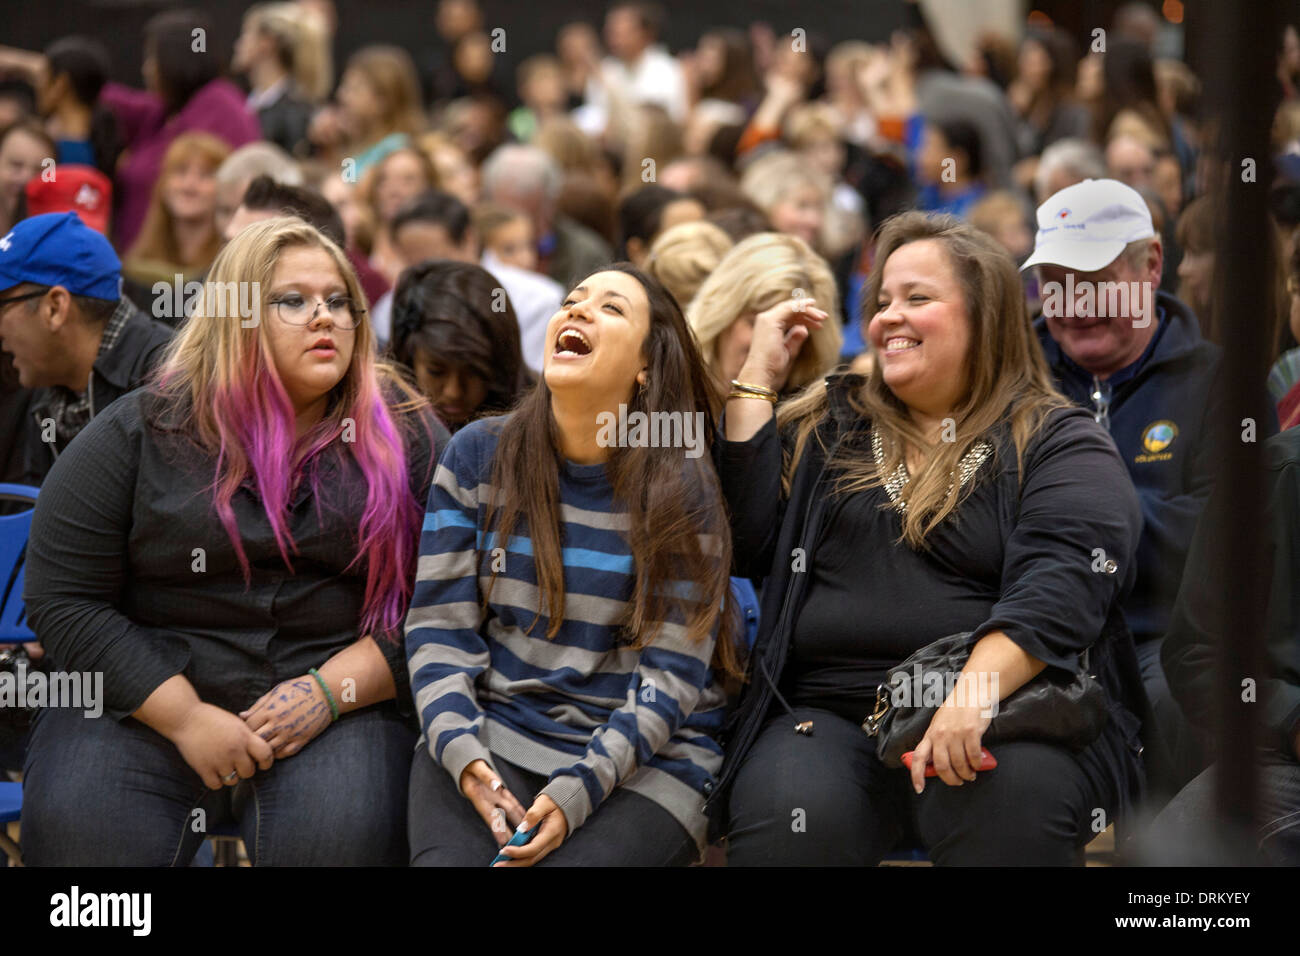 Two 'plus-size' teen girls share a laugh with a friend at a high school concert in Aliso Viejo, CA. Stock Photo